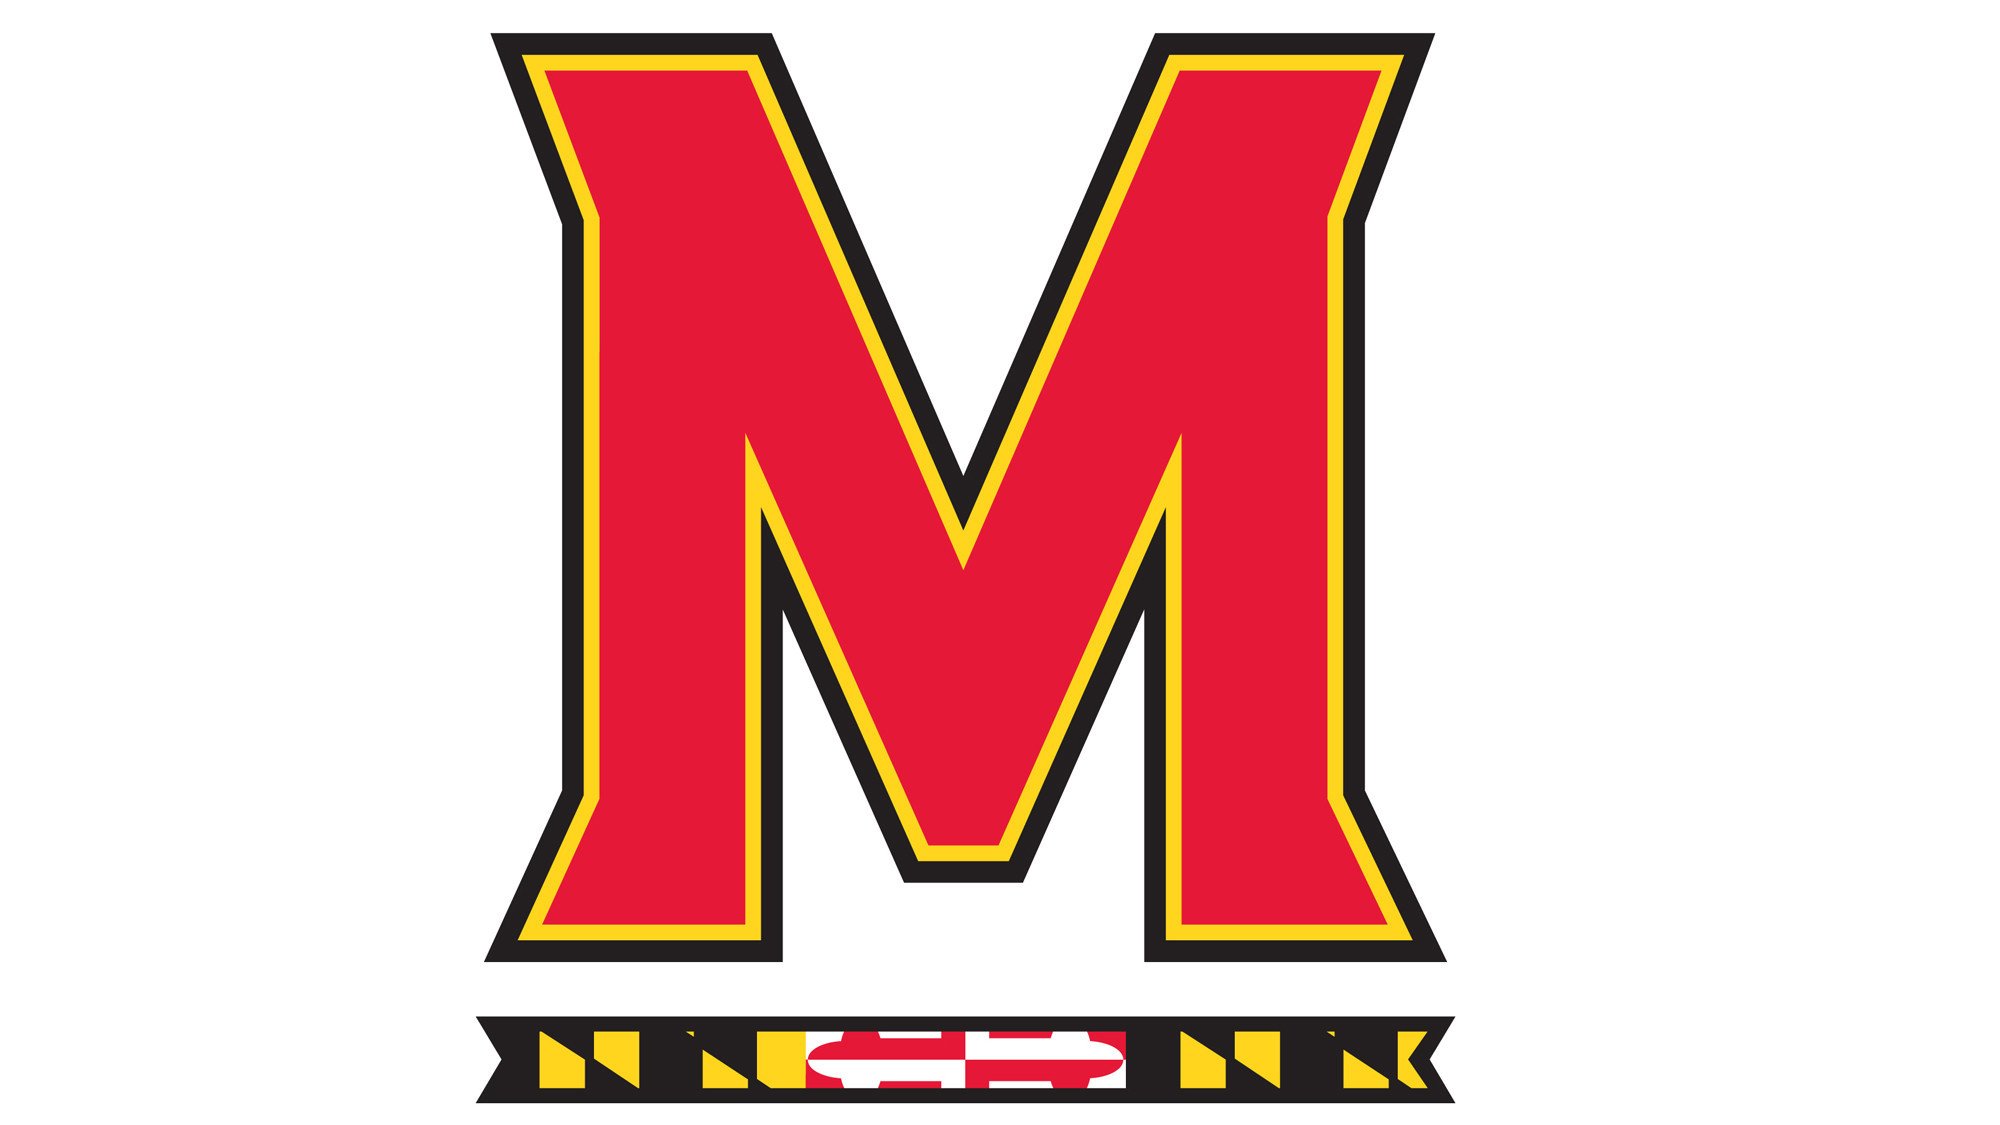 MARYLAND TERRAPINS college football wallpaper background 2000x1125